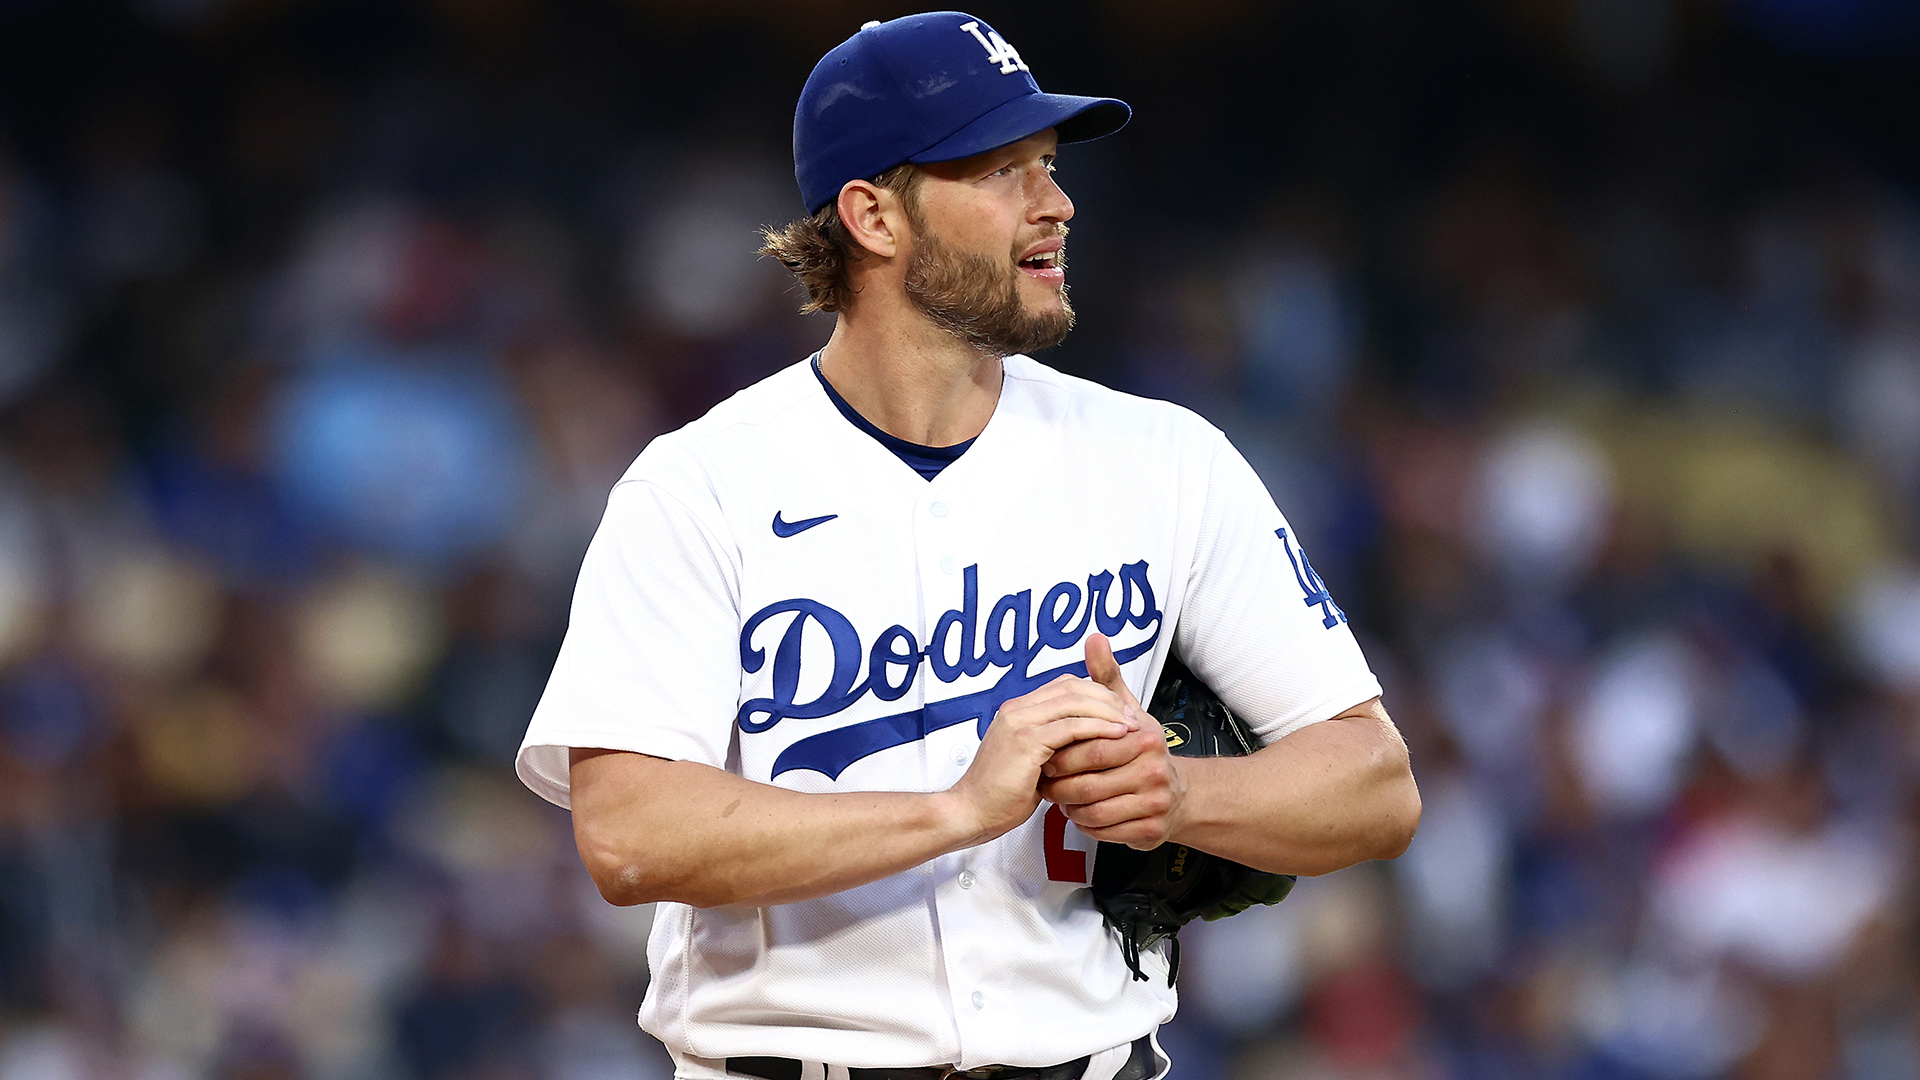 Mother of Dodgers Star, Dallas Native Clayton Kershaw Dies – NBC 5